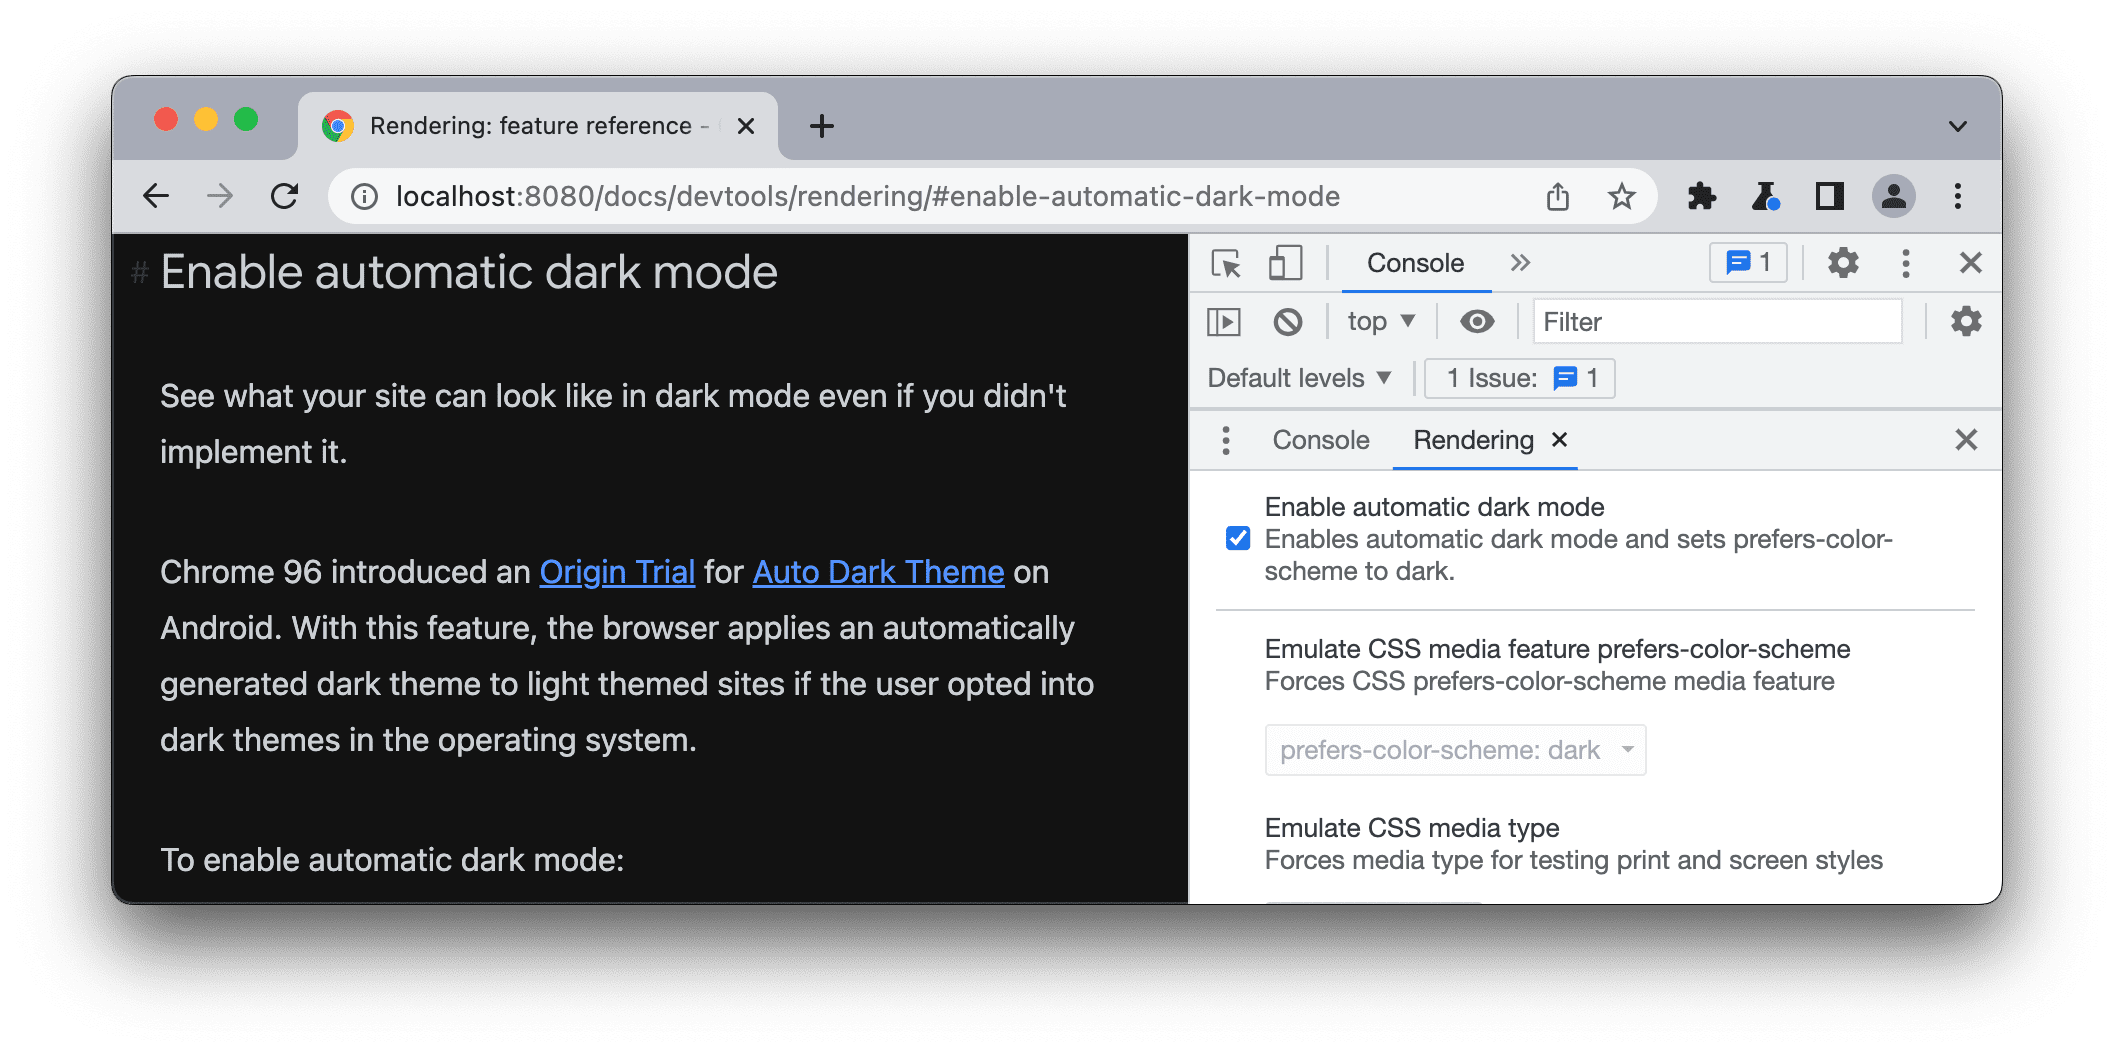 Automatic dark mode enabled